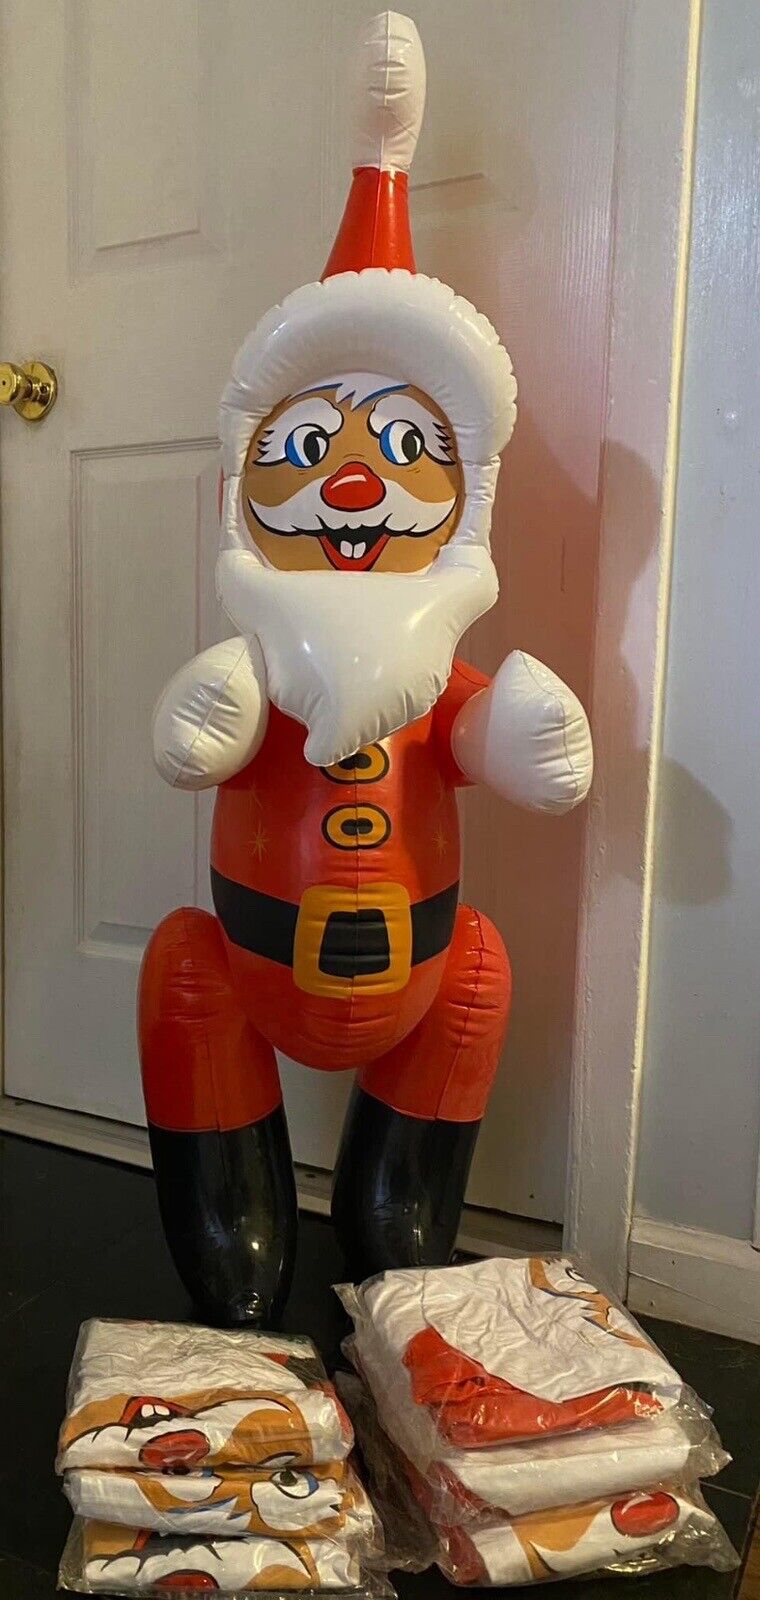 44 Inch Inflatable Santa Claus New in Bag Vintage